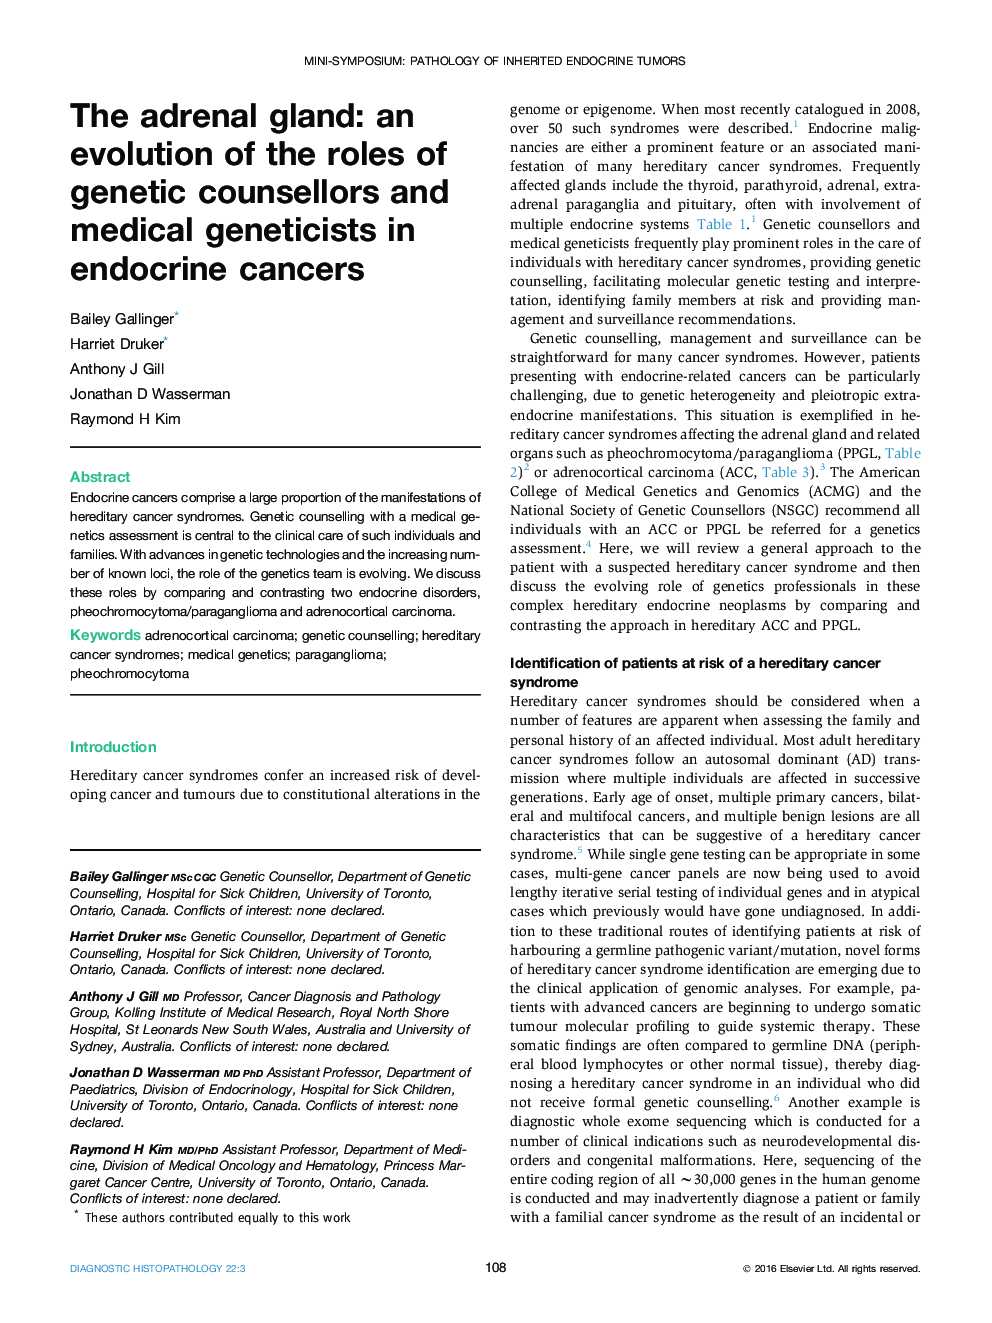 The adrenal gland: an evolution of the roles of genetic counsellors and medical geneticists in endocrine cancers